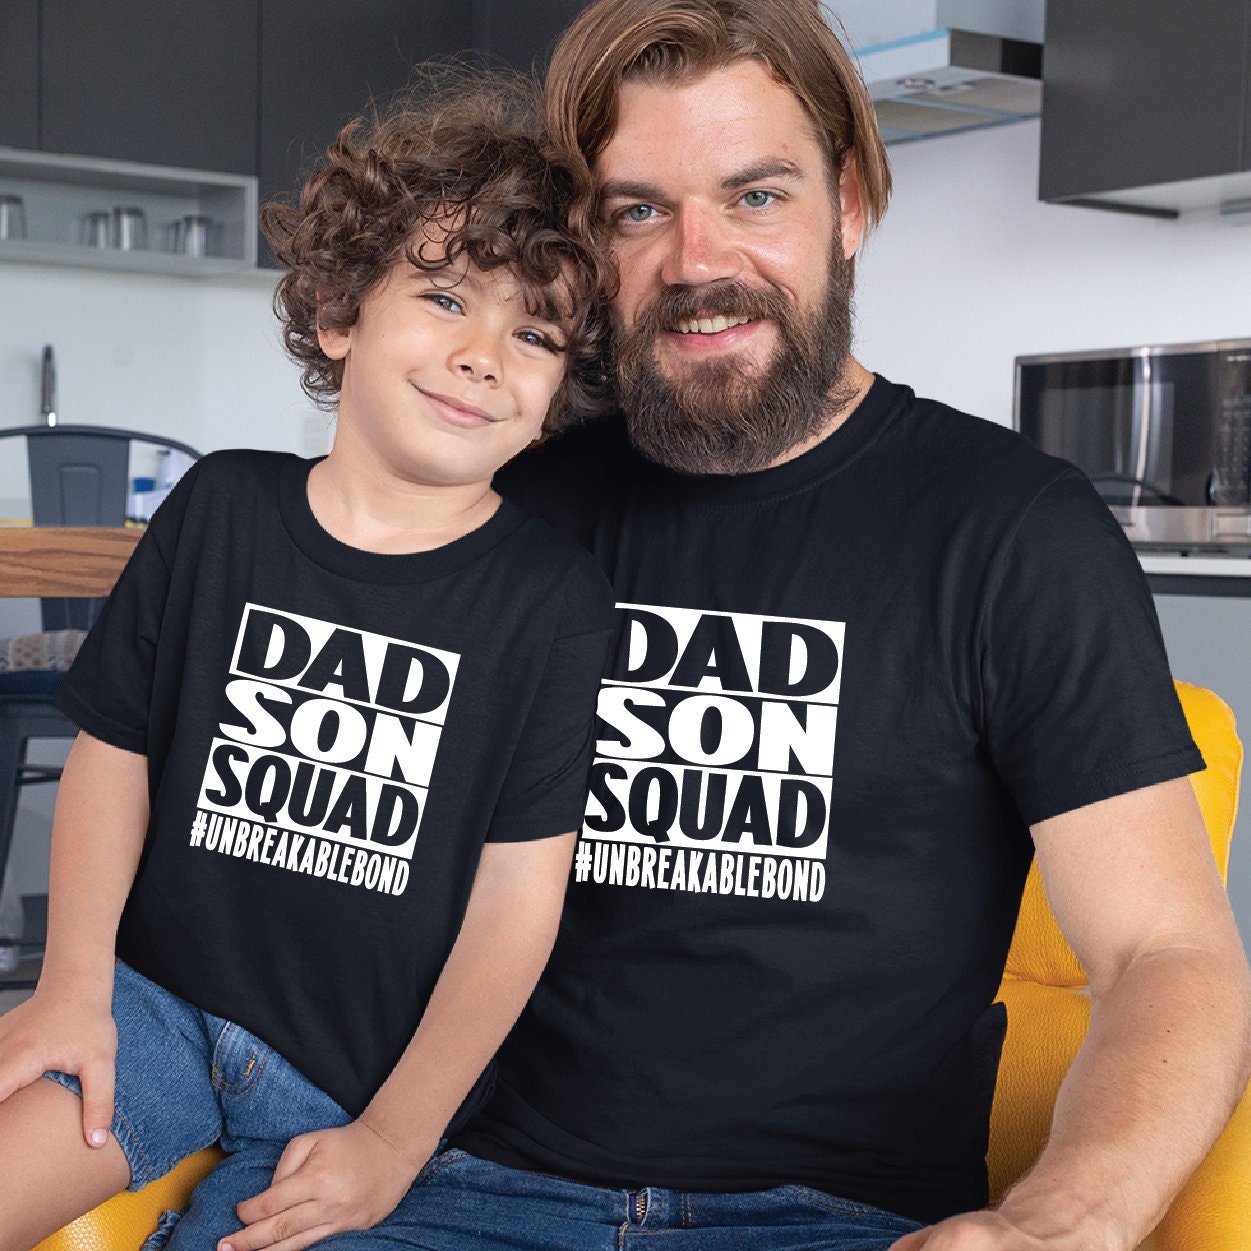 Dad Son Matching T-shirt baby vest, Dad Gifts, Daddy Gifts, Father's Day Gift, Dad Son Squad Unbreakable Bond Shirts, Dad and baby Matching